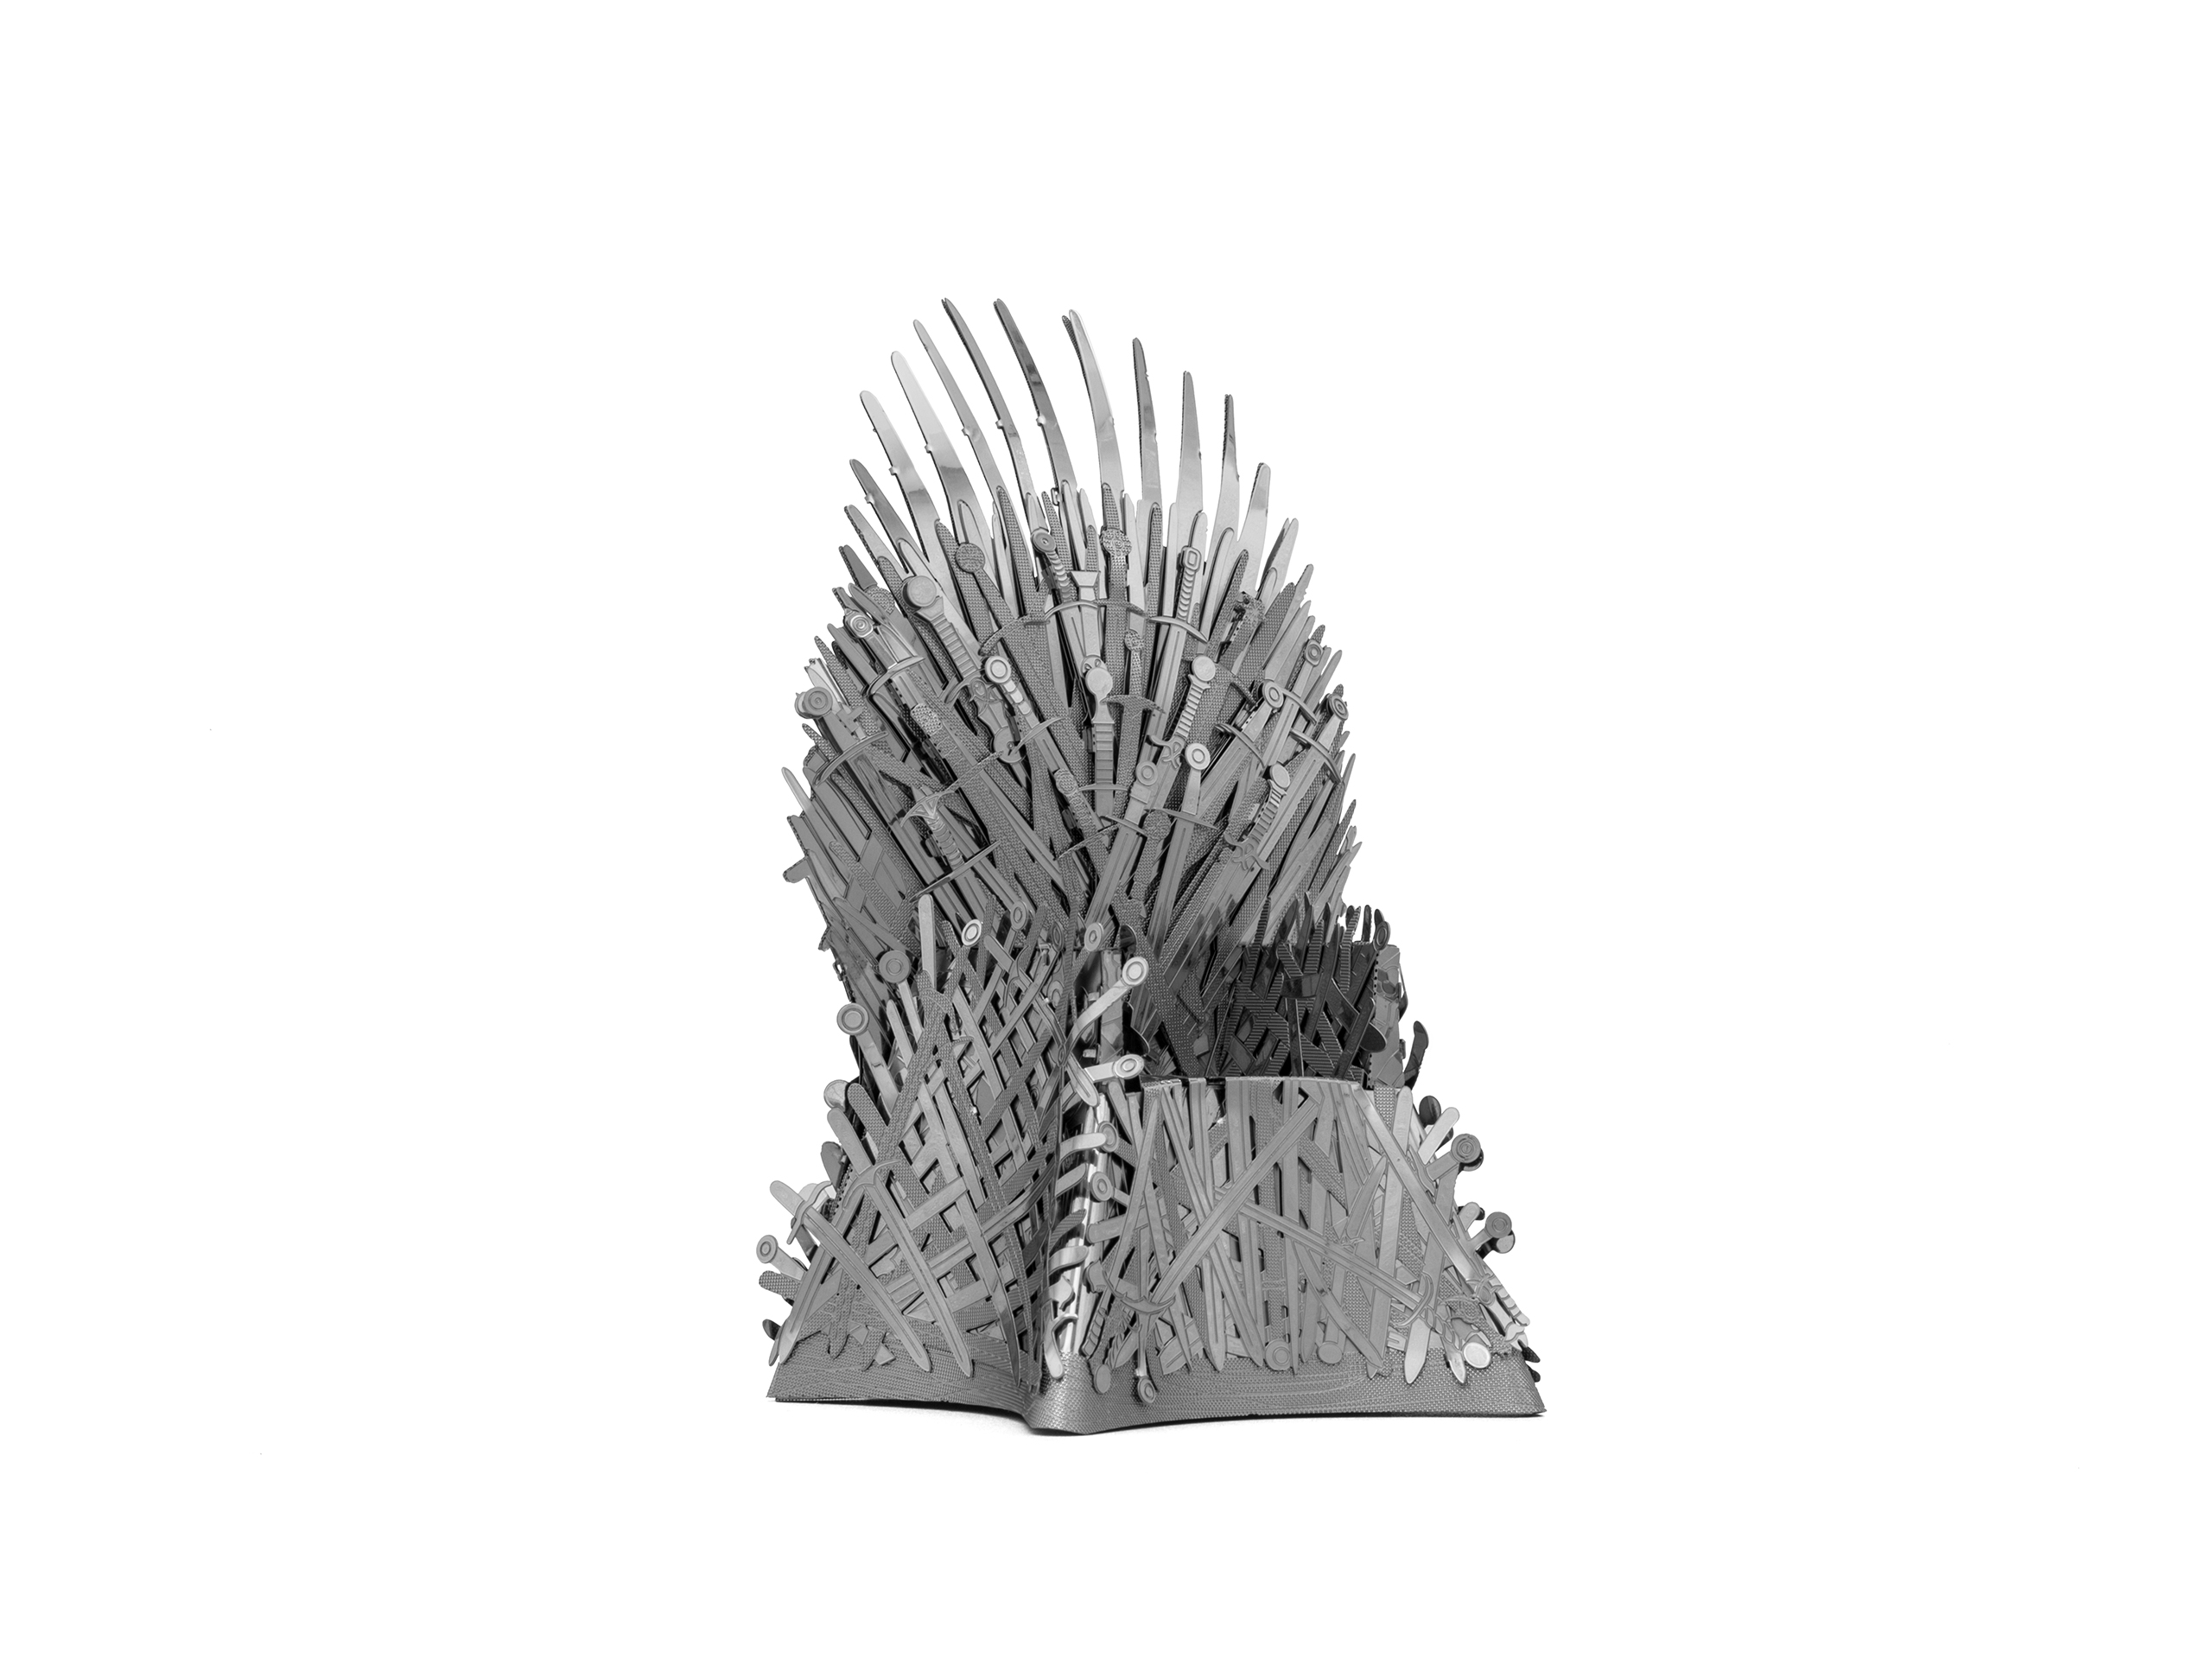 Iron Throne Drawing : Hand drawn iron throne of westeros made of